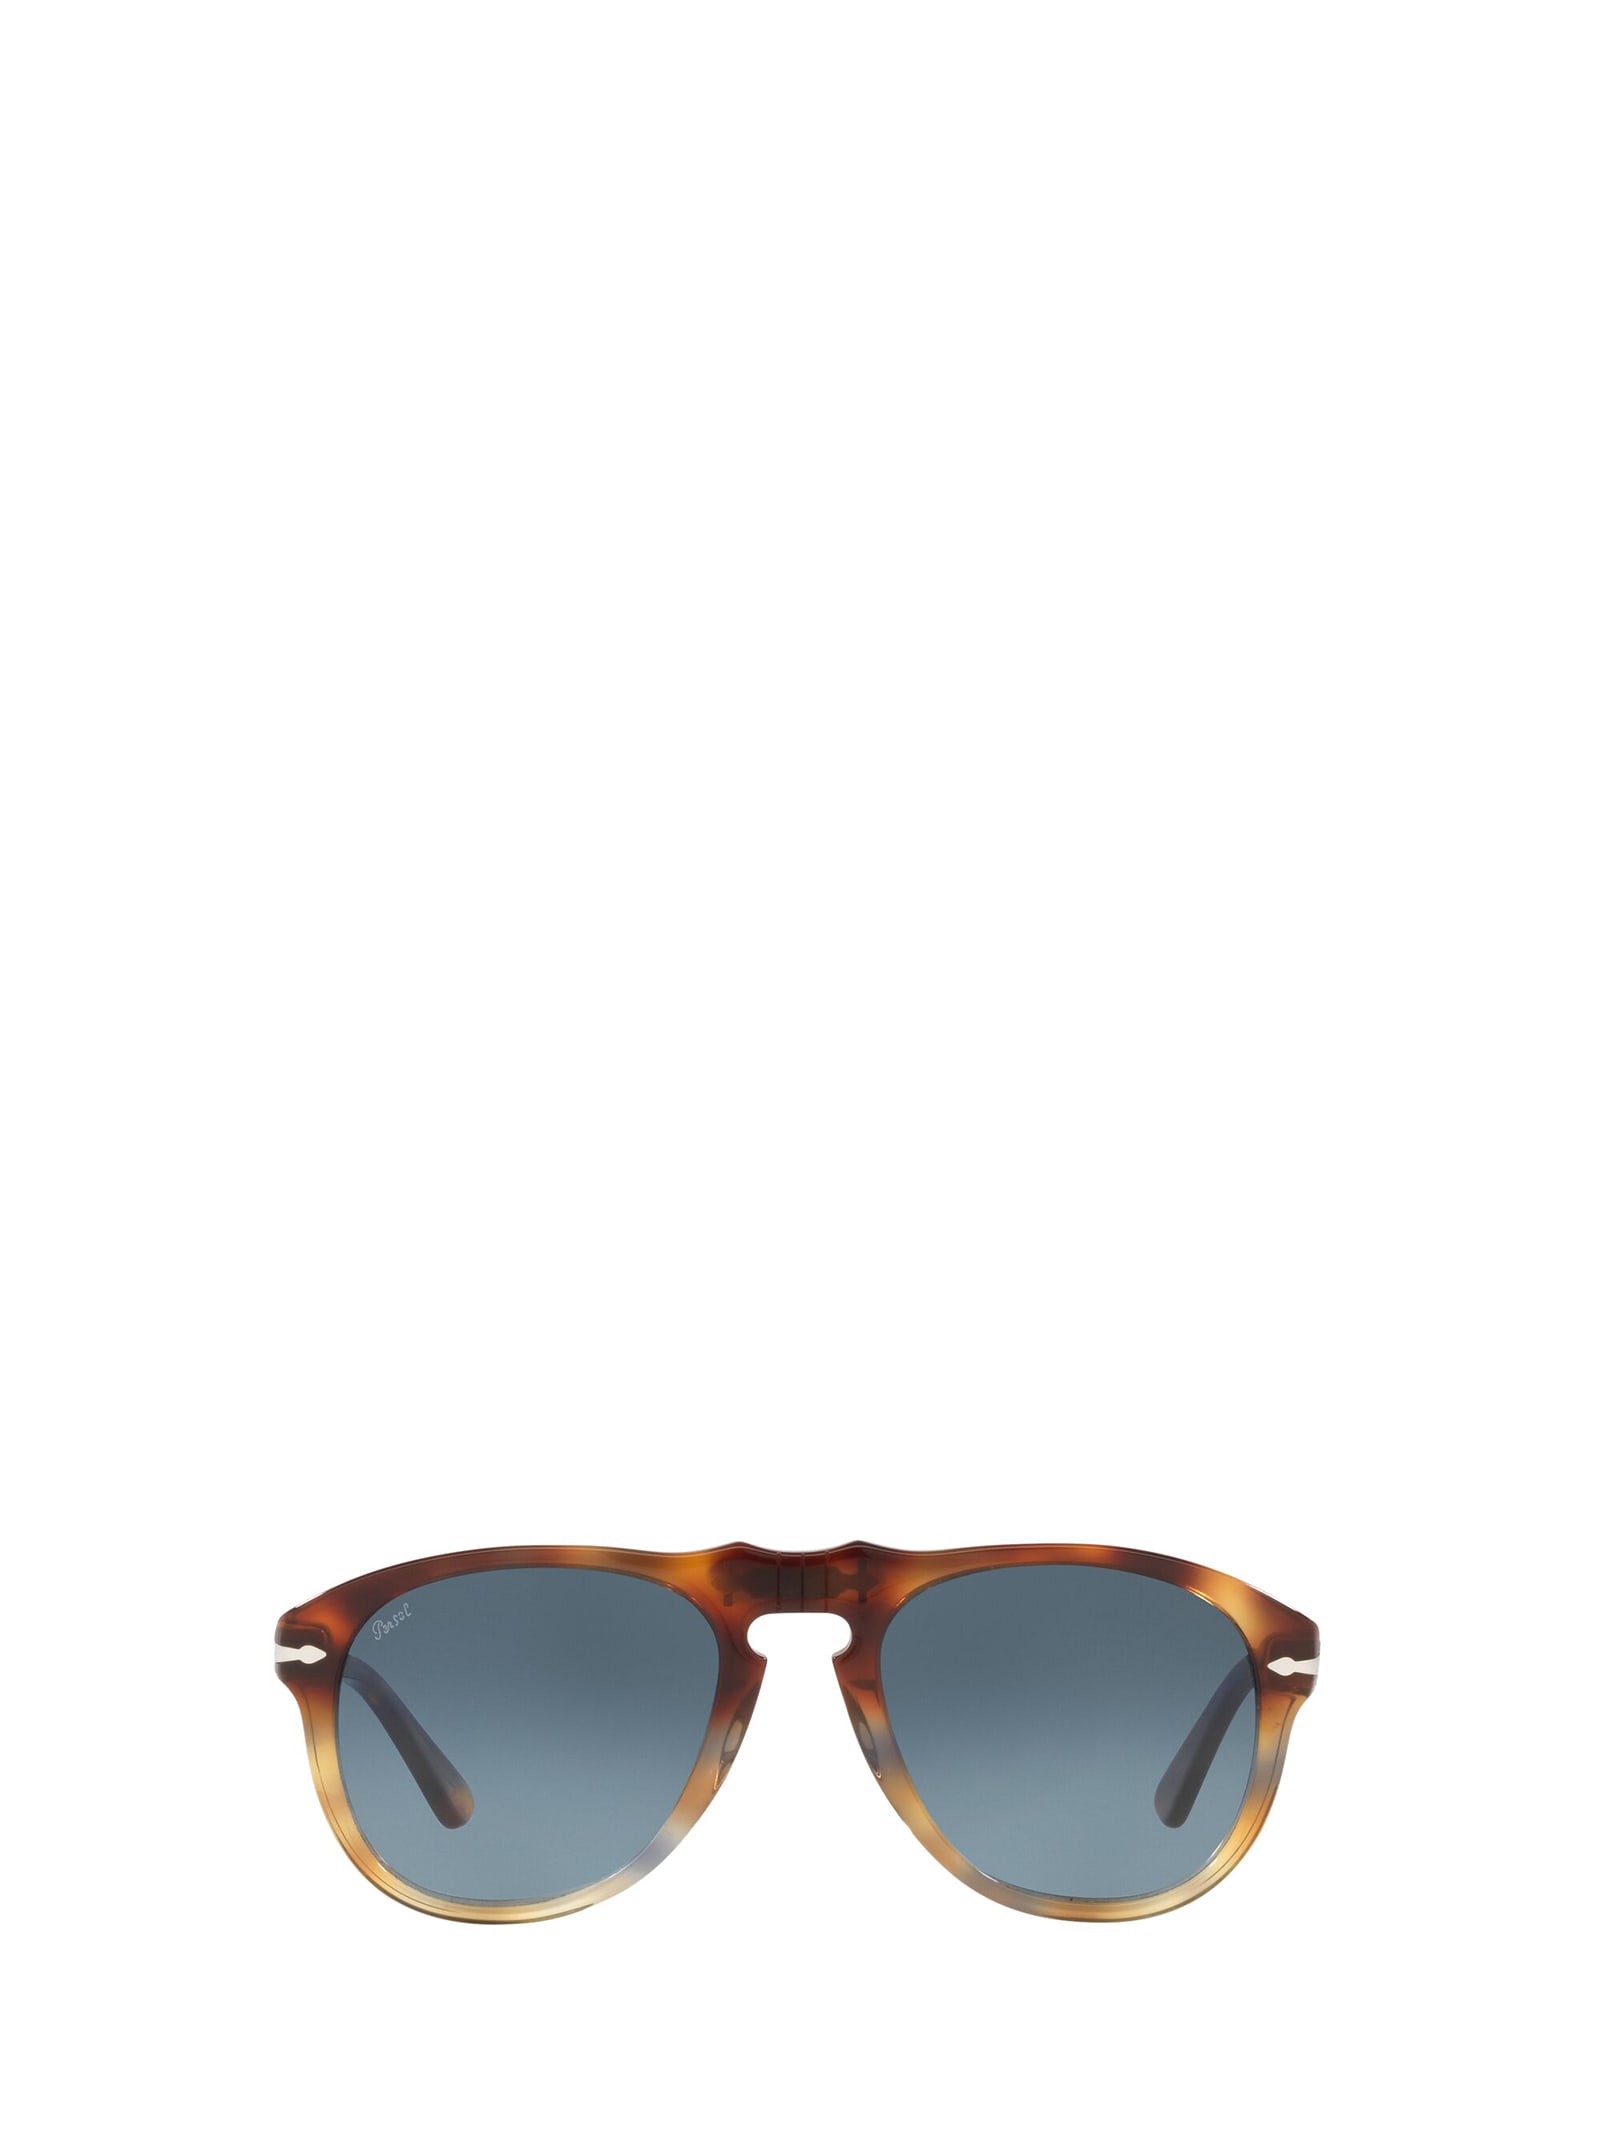 Persol Po0649 Tortoise Spotted Brown Sunglasses